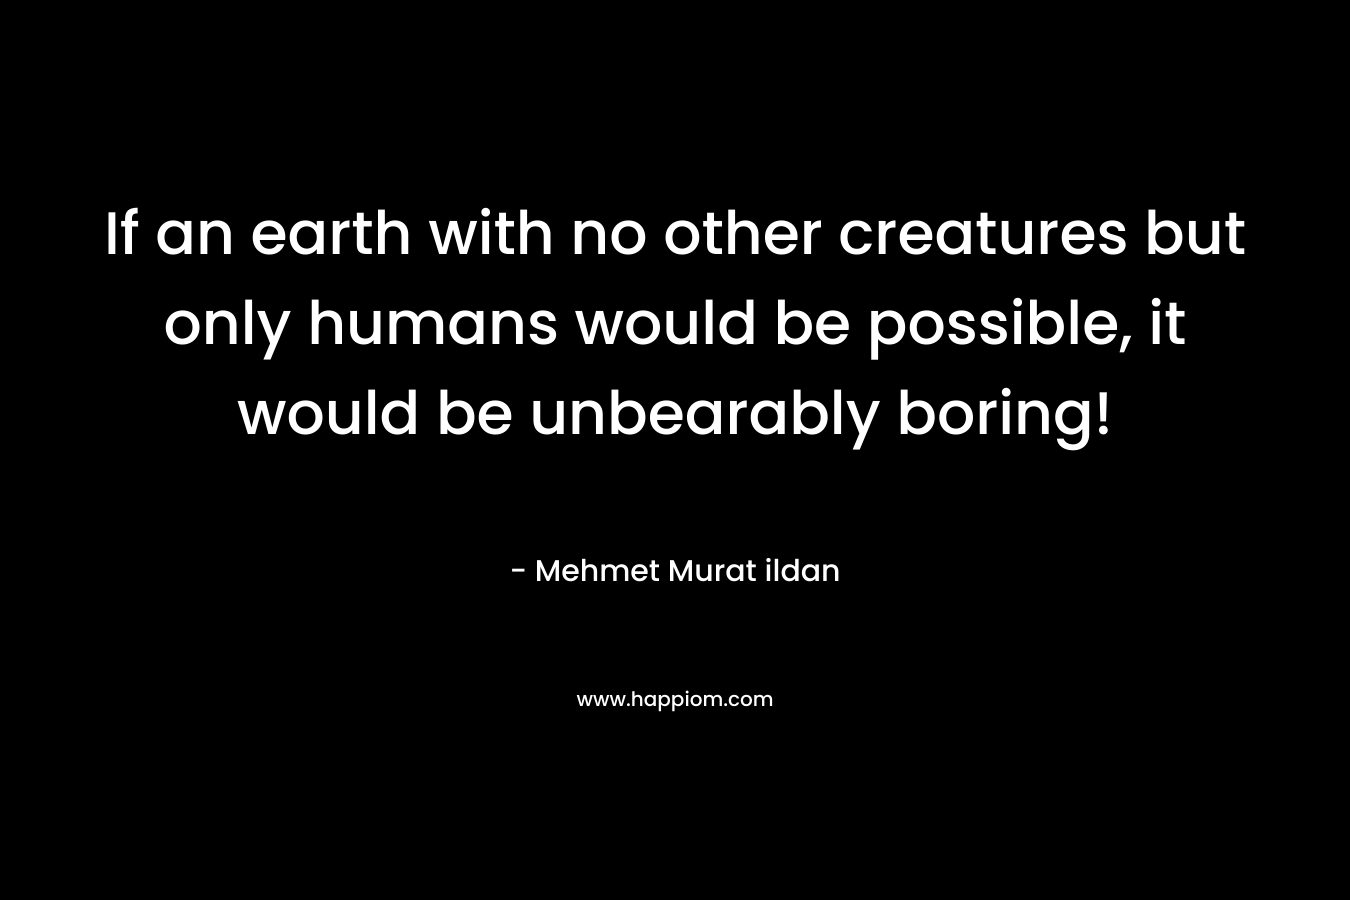 If an earth with no other creatures but only humans would be possible, it would be unbearably boring! – Mehmet Murat ildan